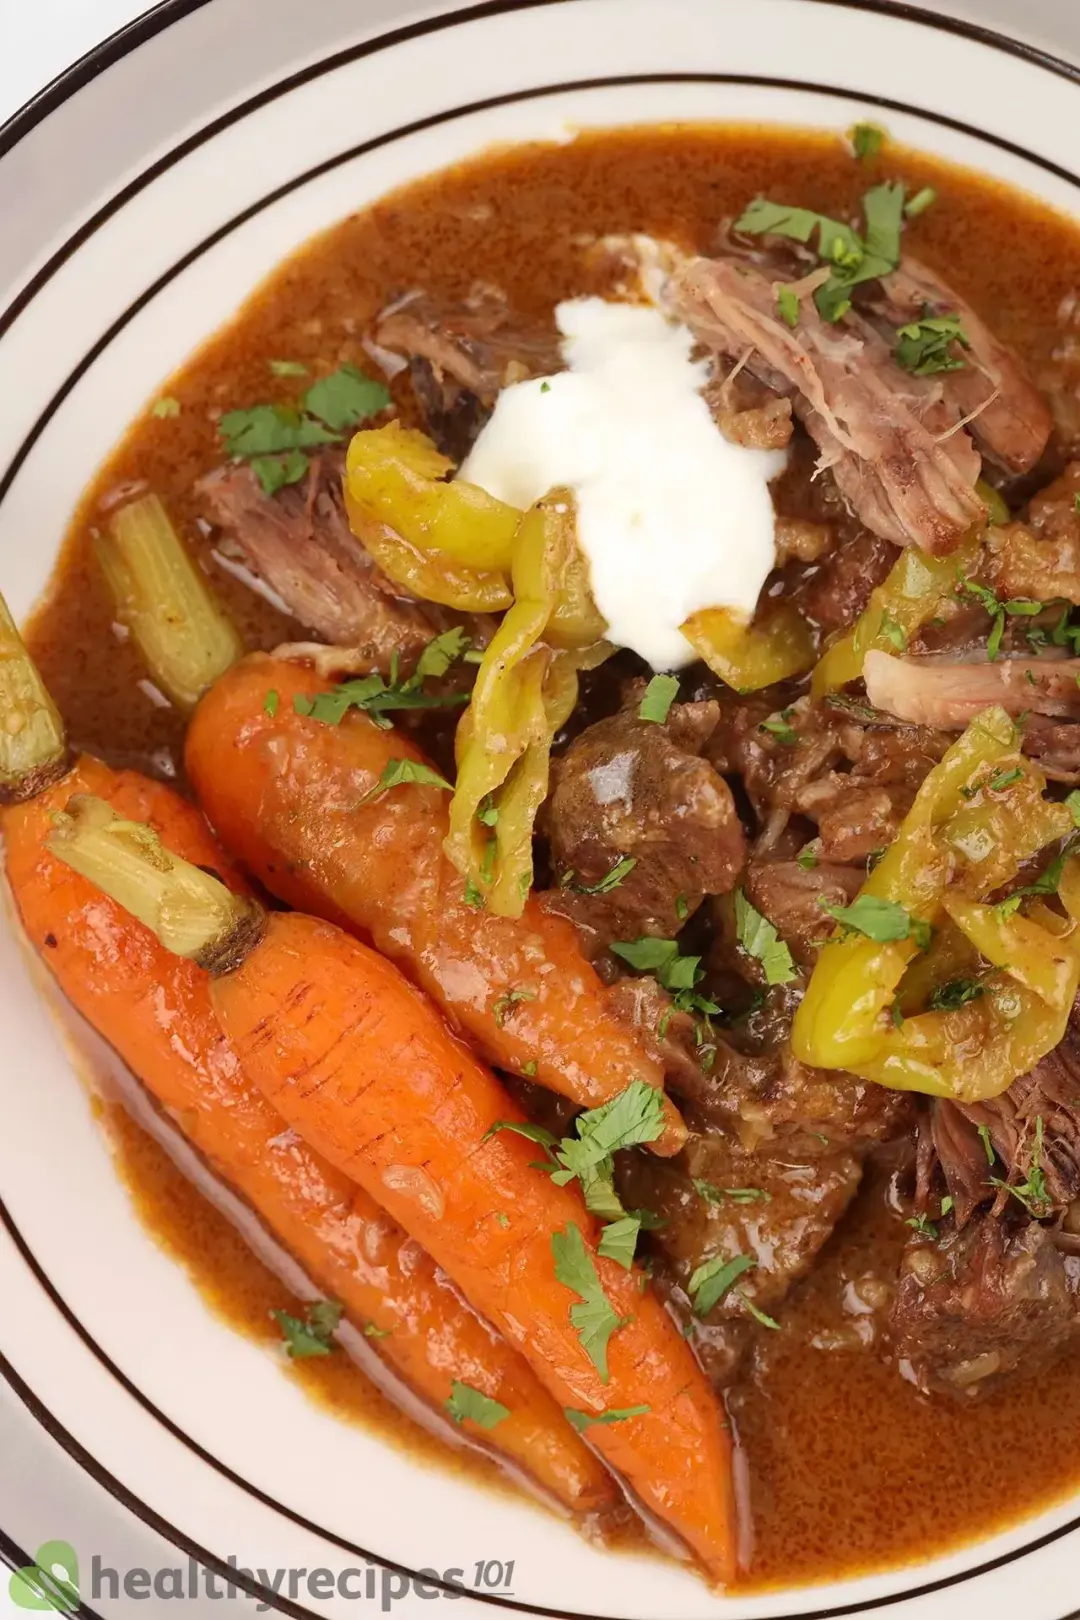 How to Make Mississippi Pot Roast in an Instant Pot